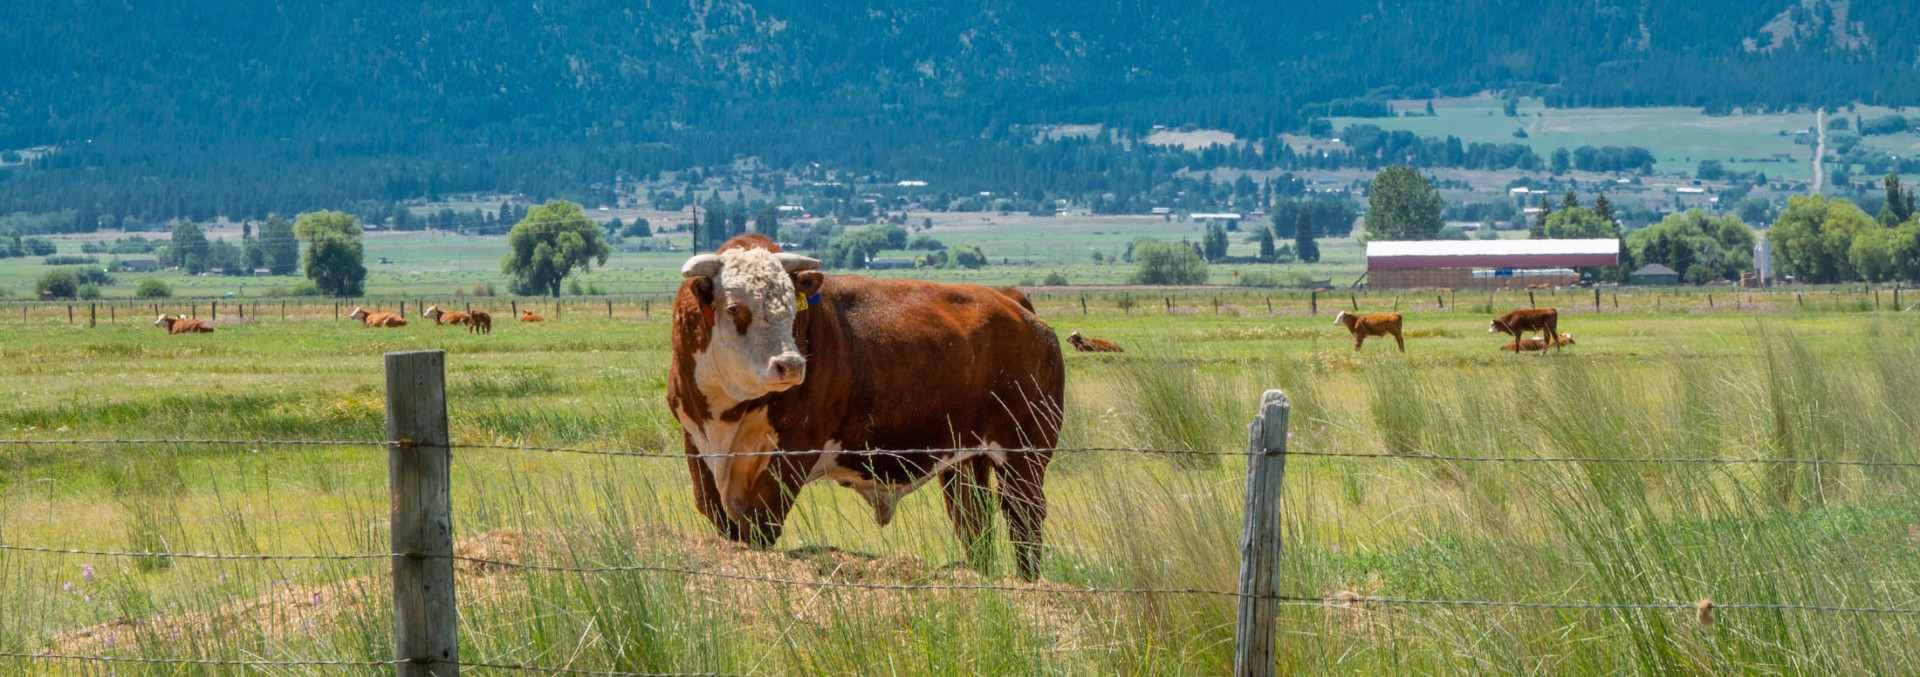 oregon cattle ranch for sale chandler hereford ranch altheader